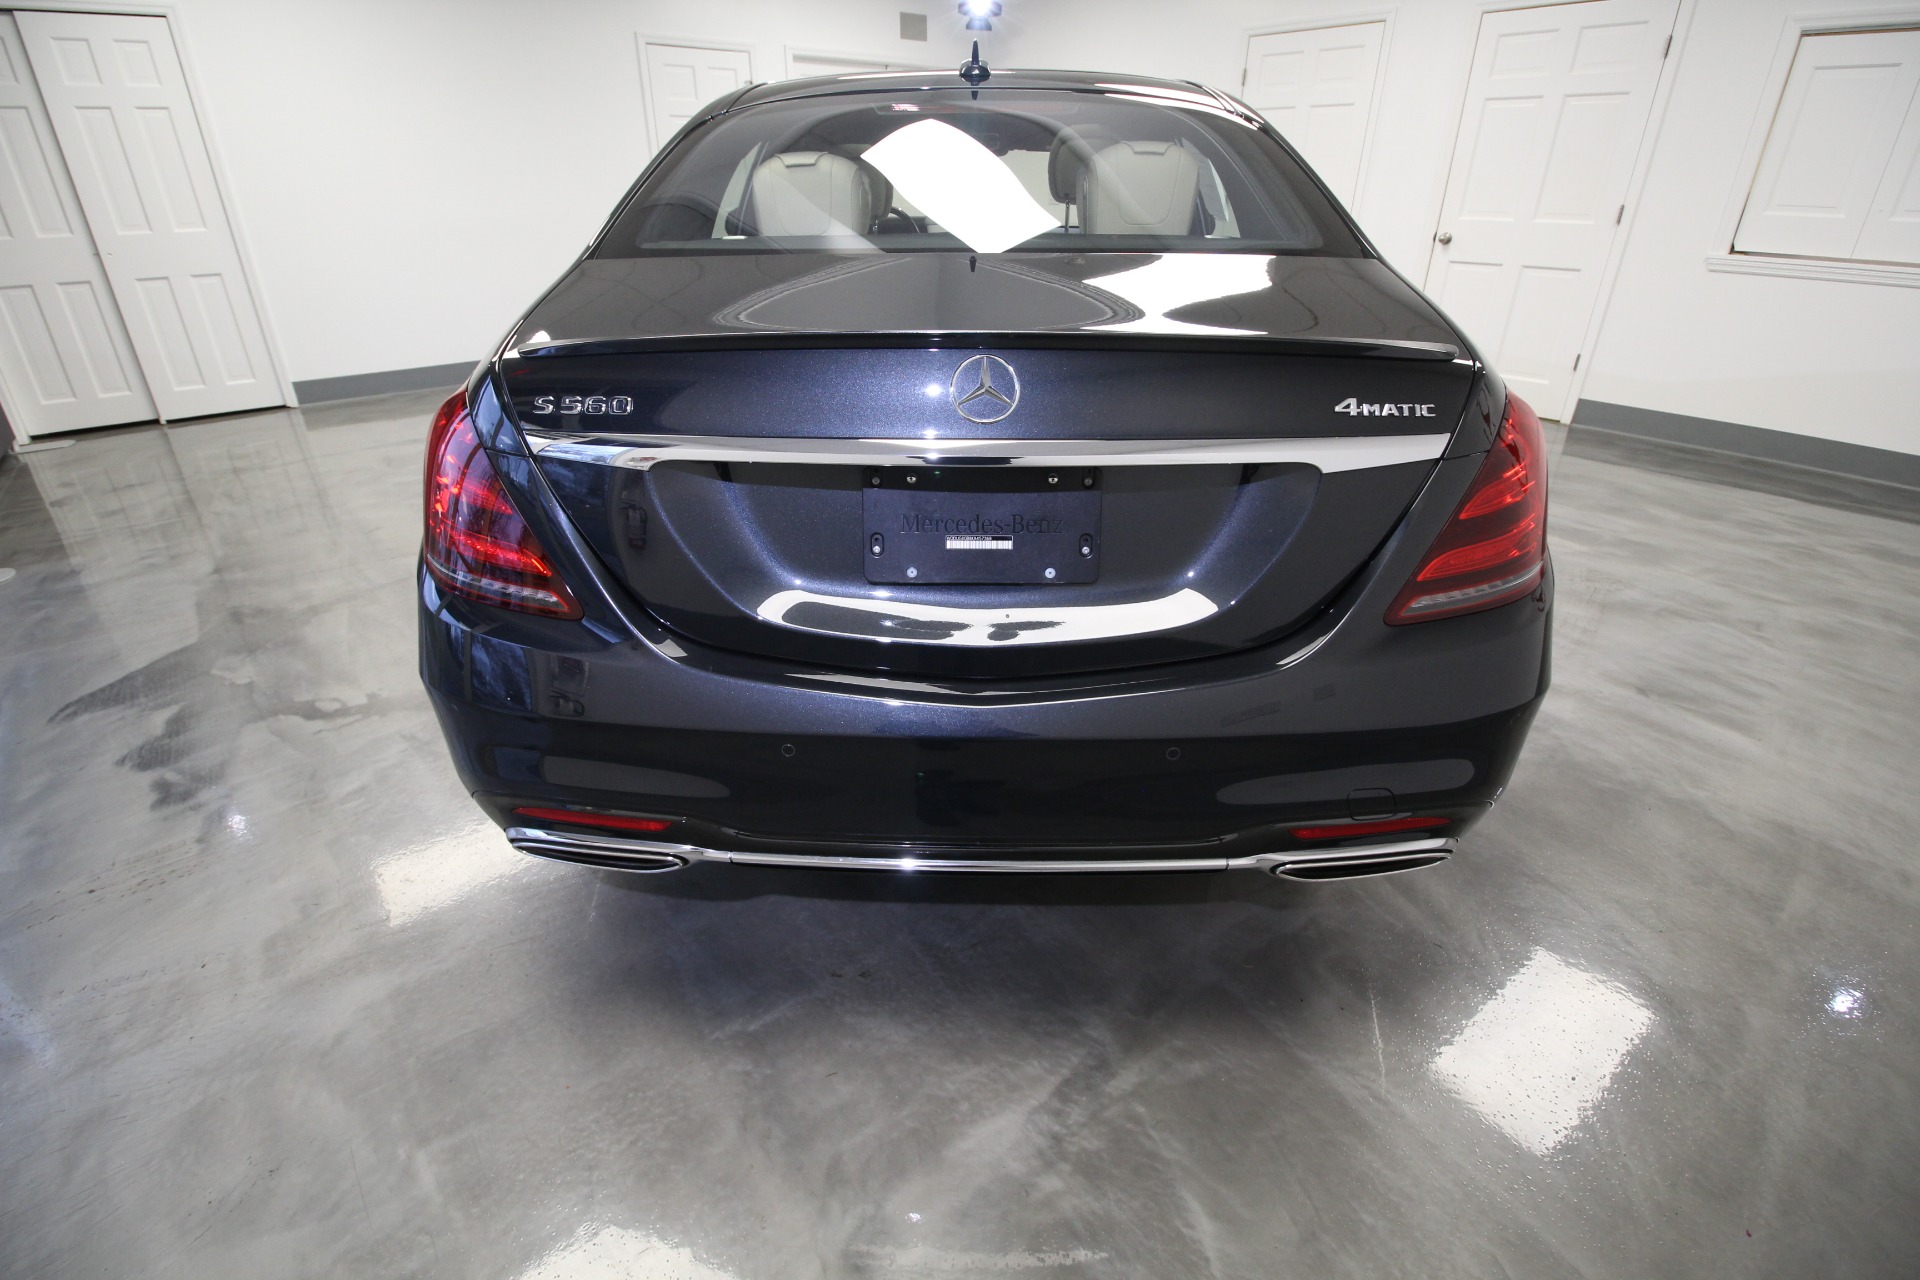 Used 2019 Magnetite Black Metallic Mercedes-Benz S-Class S560 4MATIC | Albany, NY